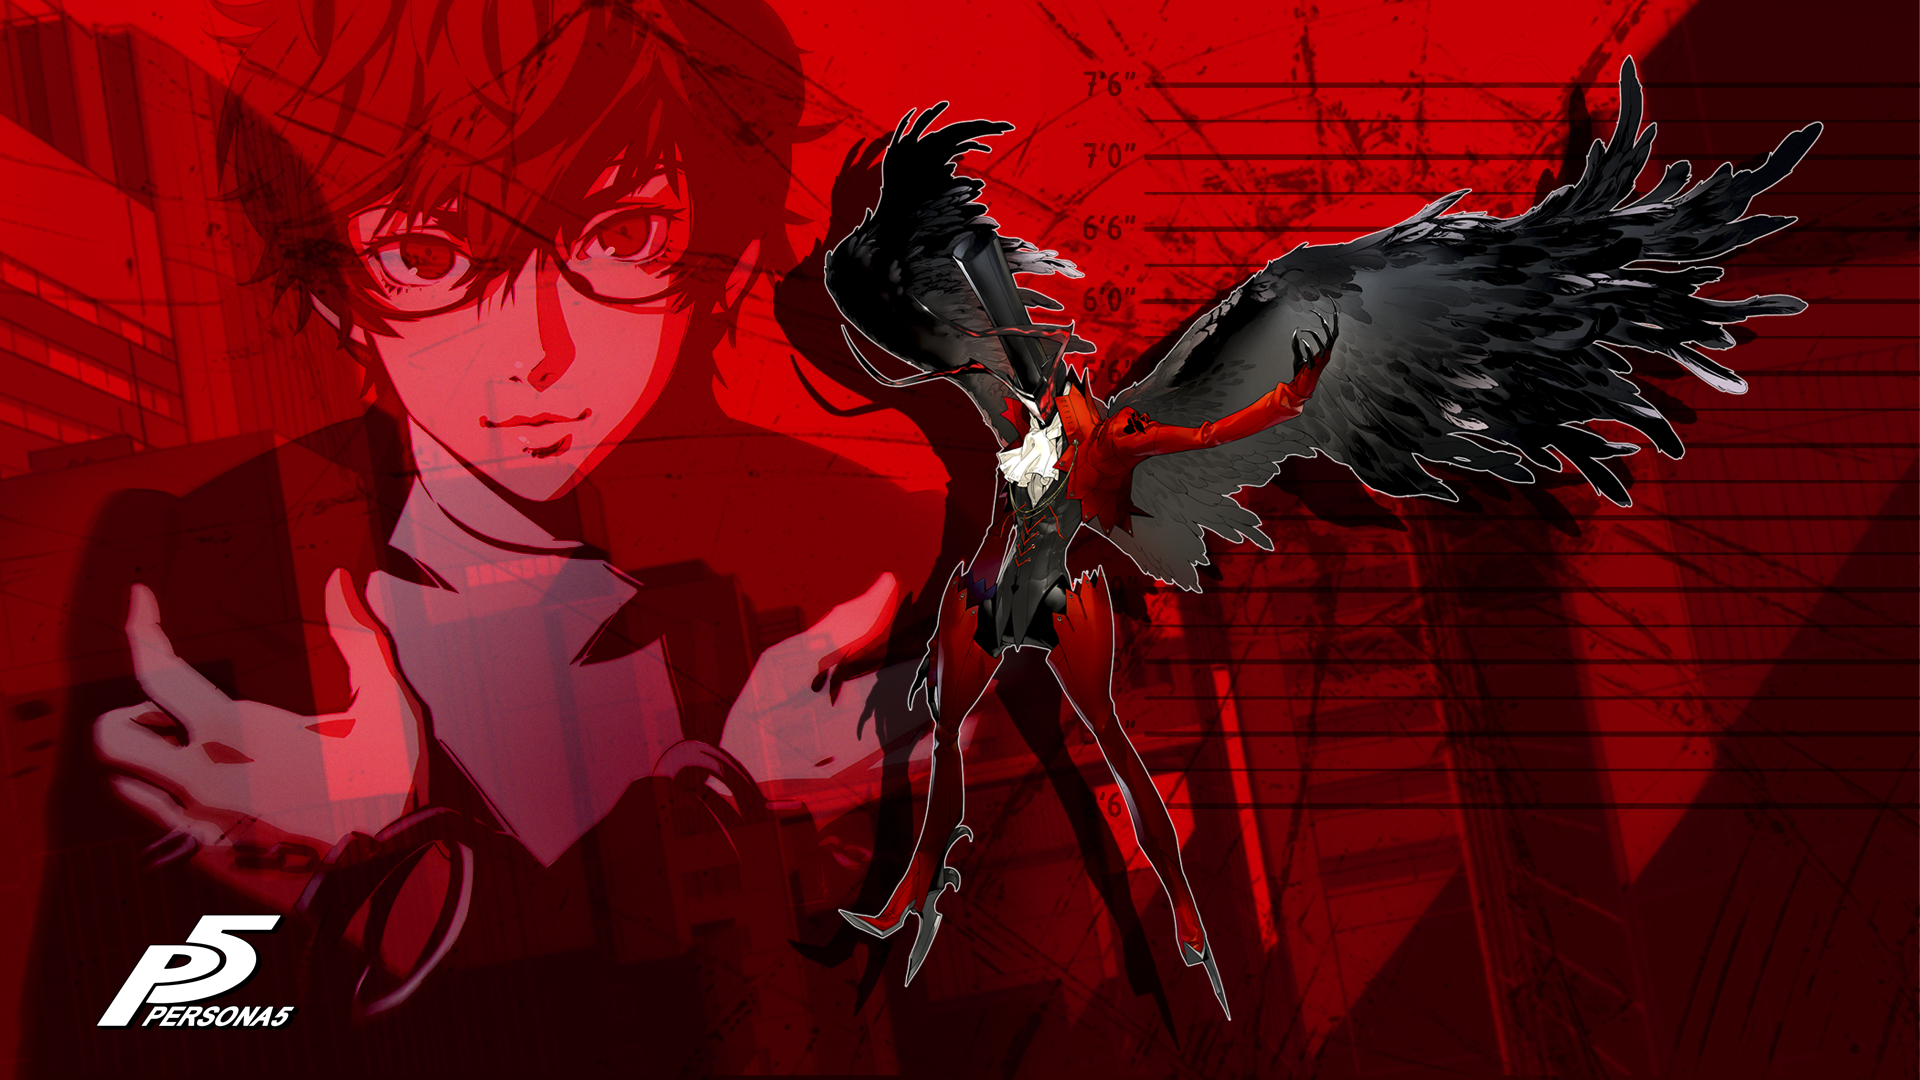 Free Download Persona 5 Wallpaper Arsene By Moonswift 19x1080 For Your Desktop Mobile Tablet Explore 48 Persona 5 Hd Wallpaper Persona 3 Wallpaper Persona 4 Wallpapers Persona 4 Hd Wallpaper